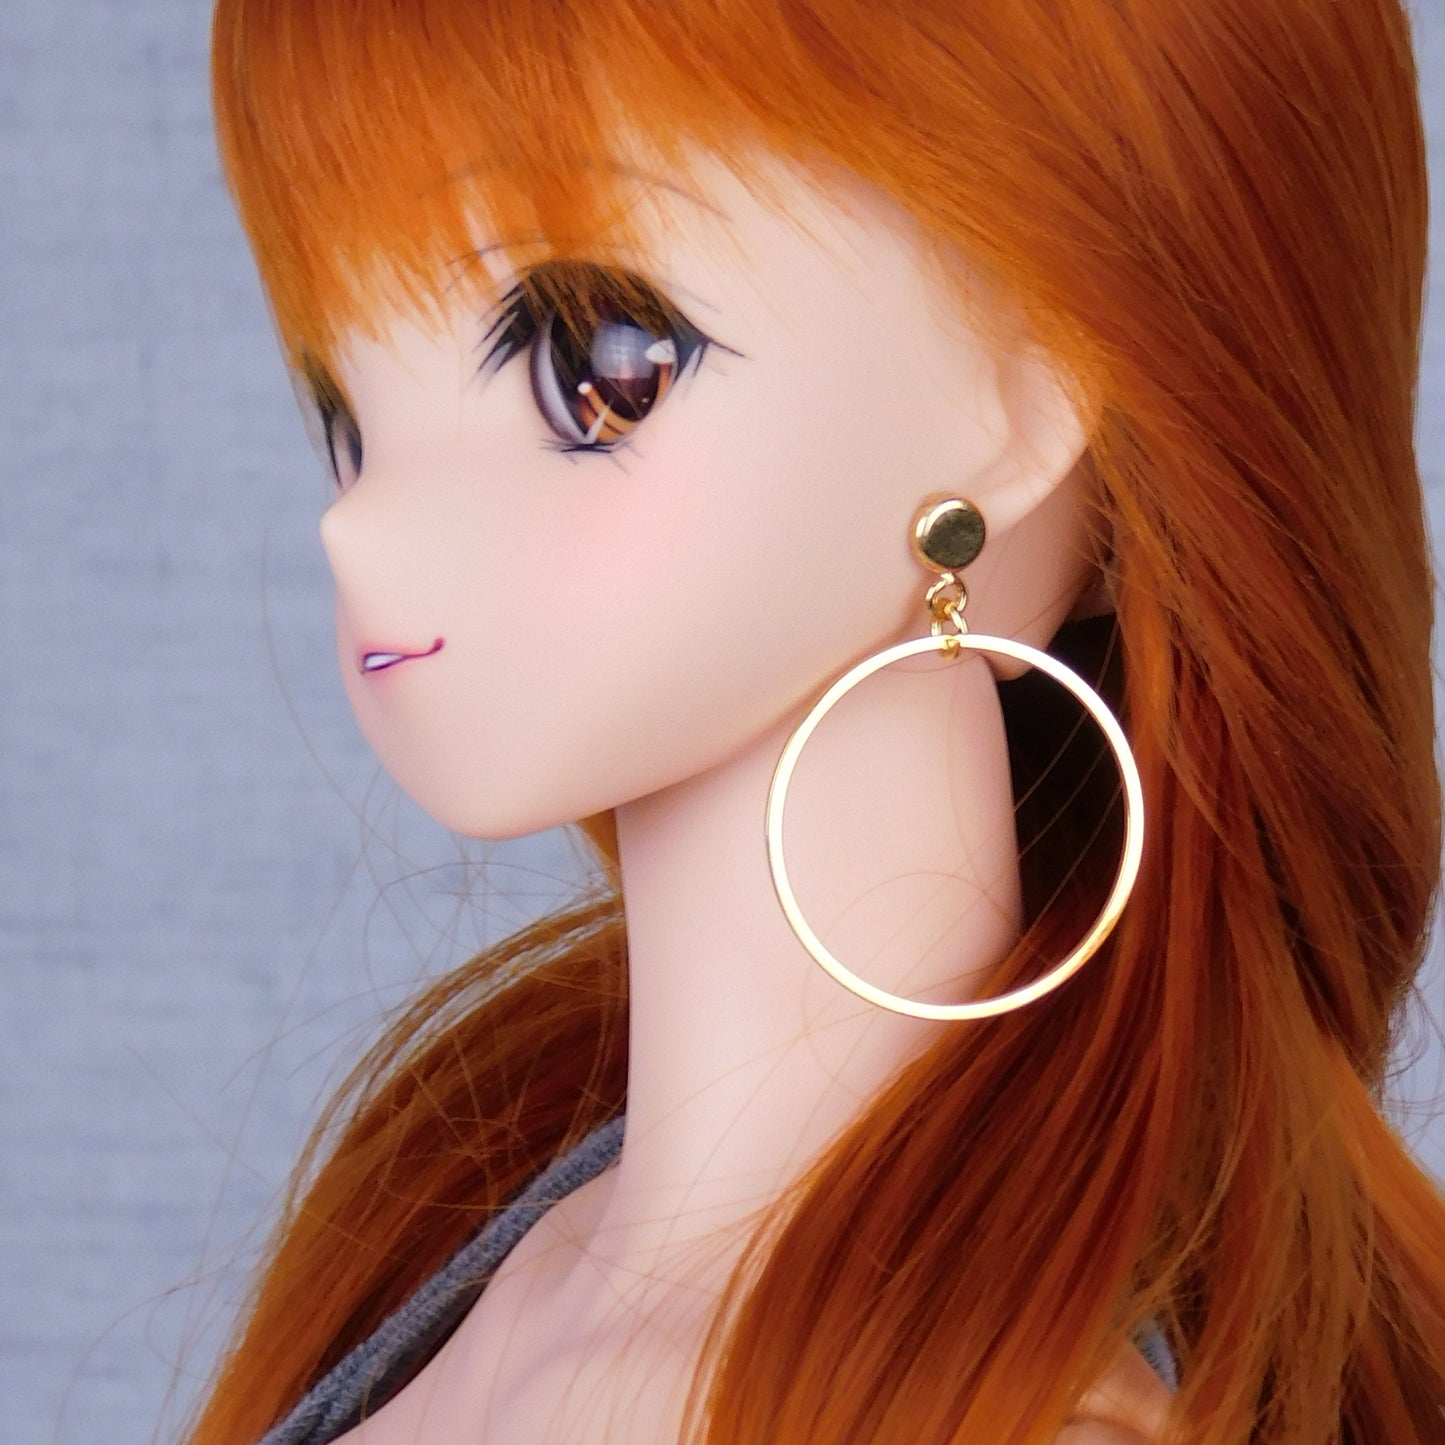 No-Hole Earring for Vinlyl Dolls - Round Hoops (Silver or Gold)